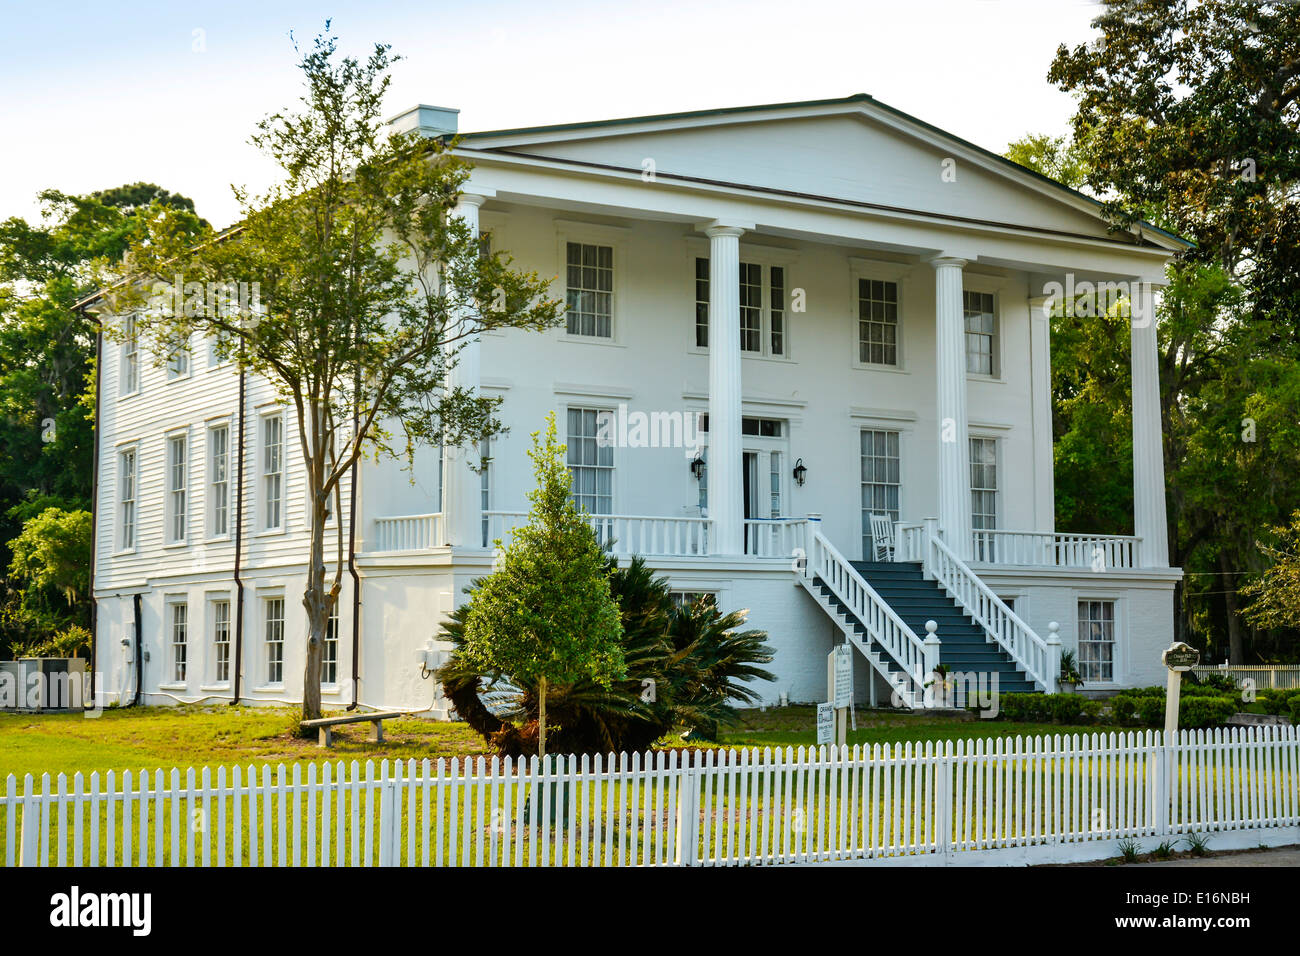 Impressive, large white Greek Revival designed Orange Hall building built in 1830 sits dramatically in historic St.Mary's, GA, USA Stock Photo